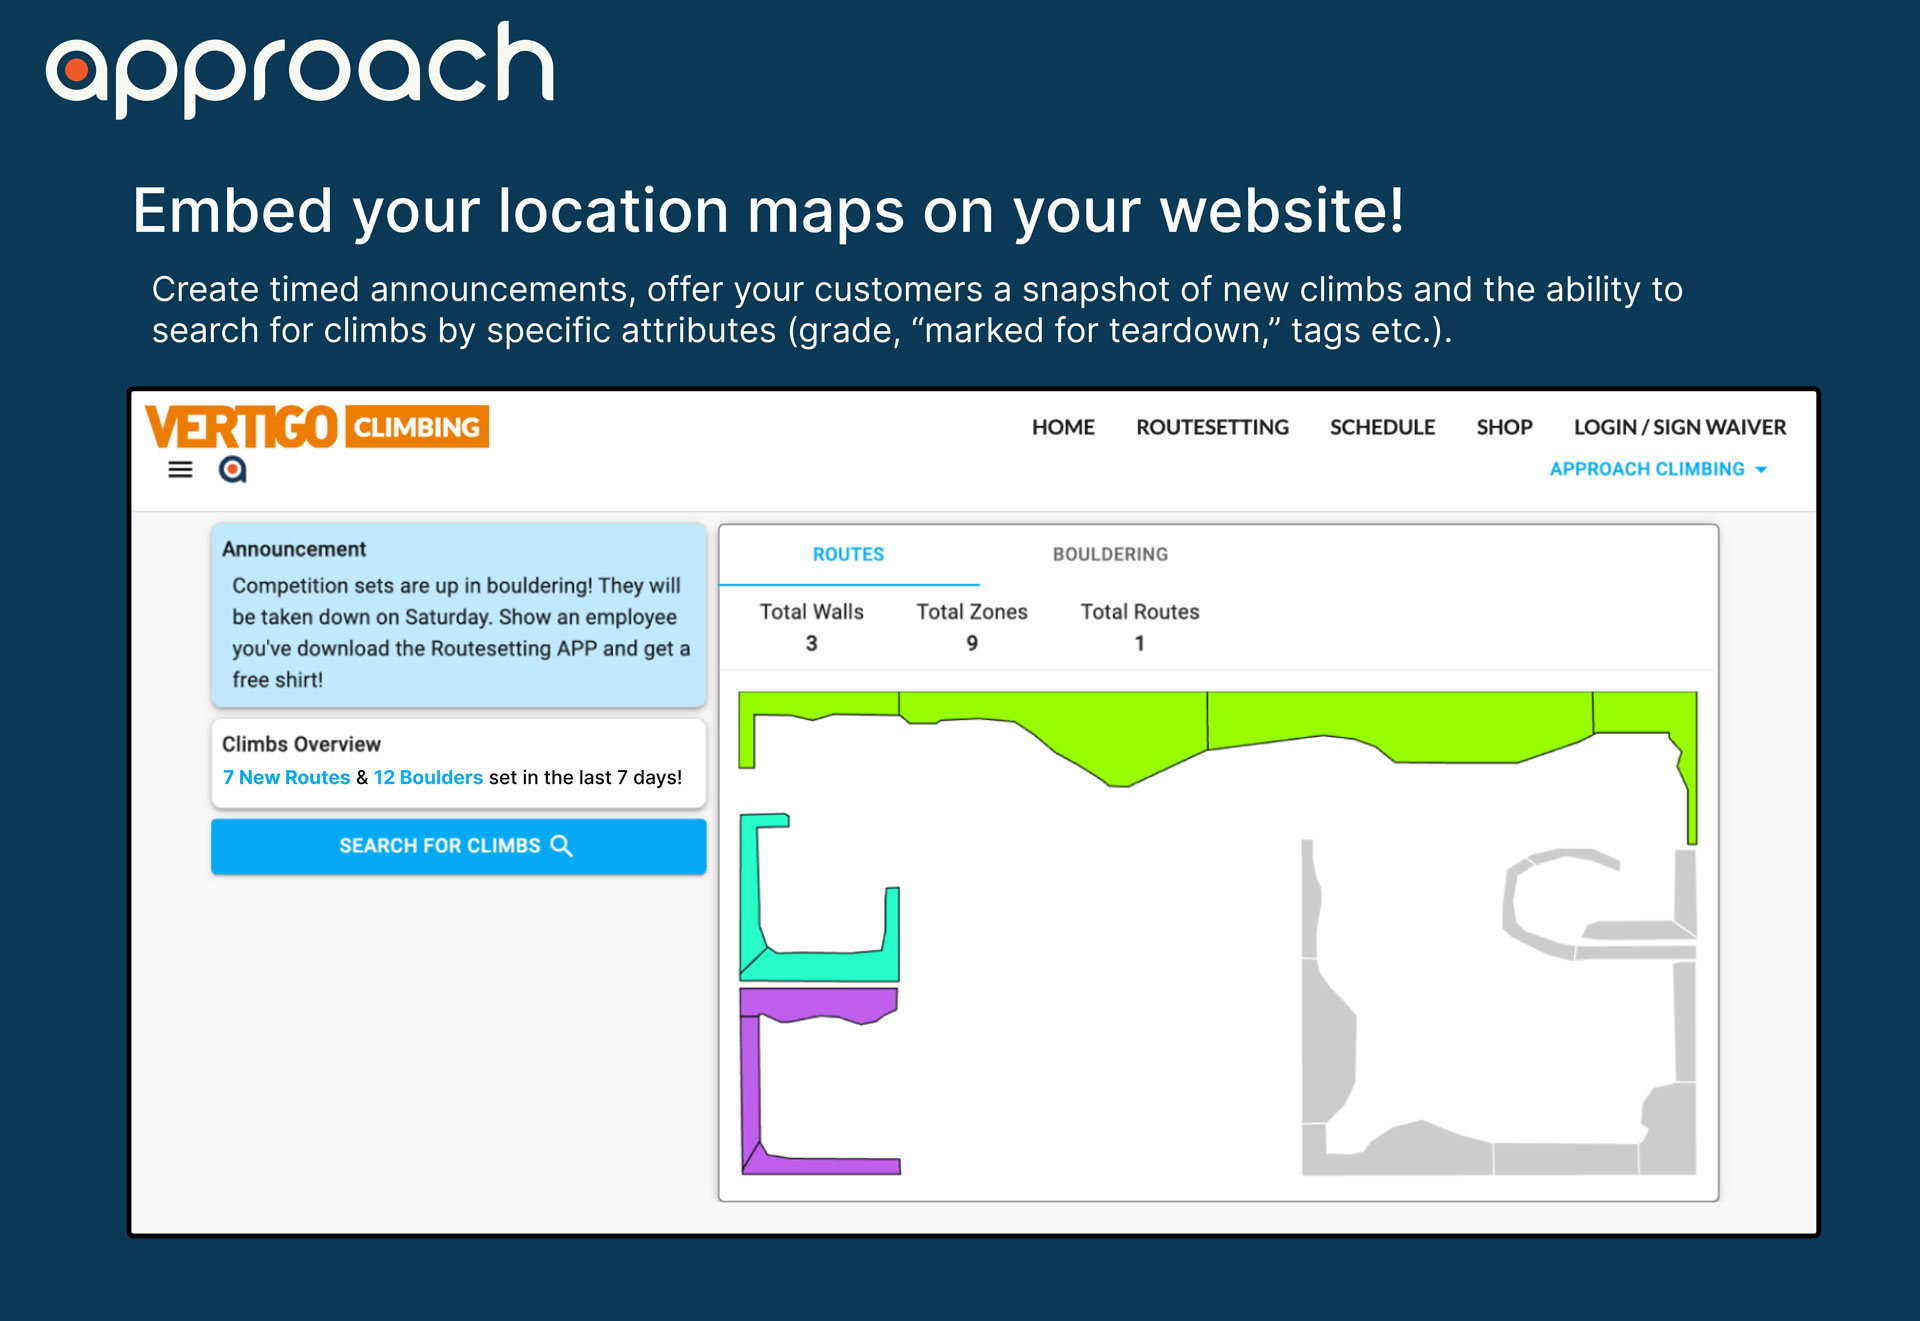 Embed your climb location maps on your website